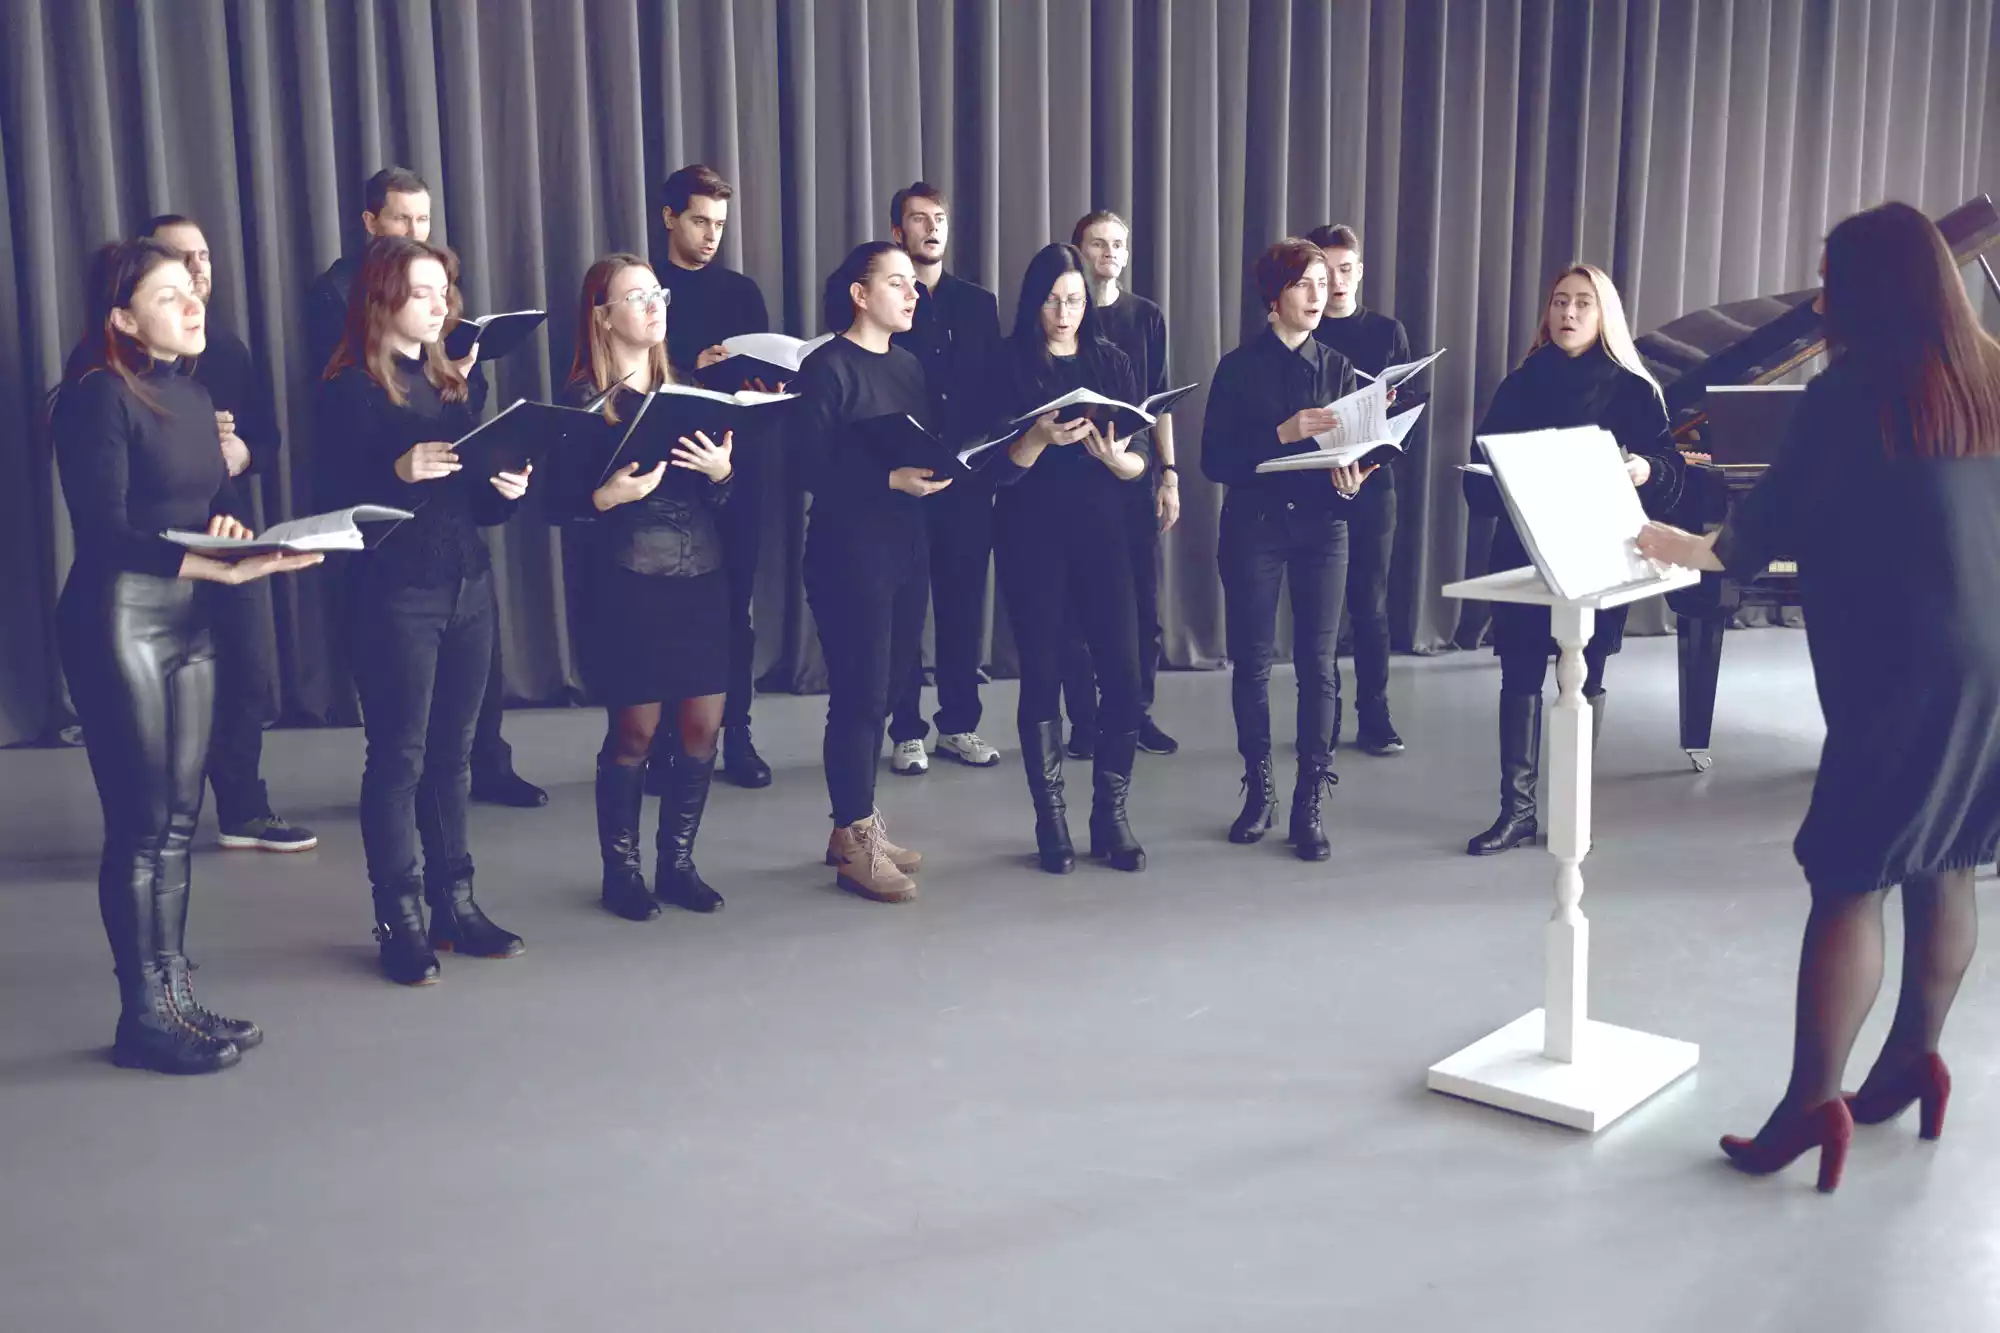 Learn about tips for singing in a choir - this photo shows a choir practicing